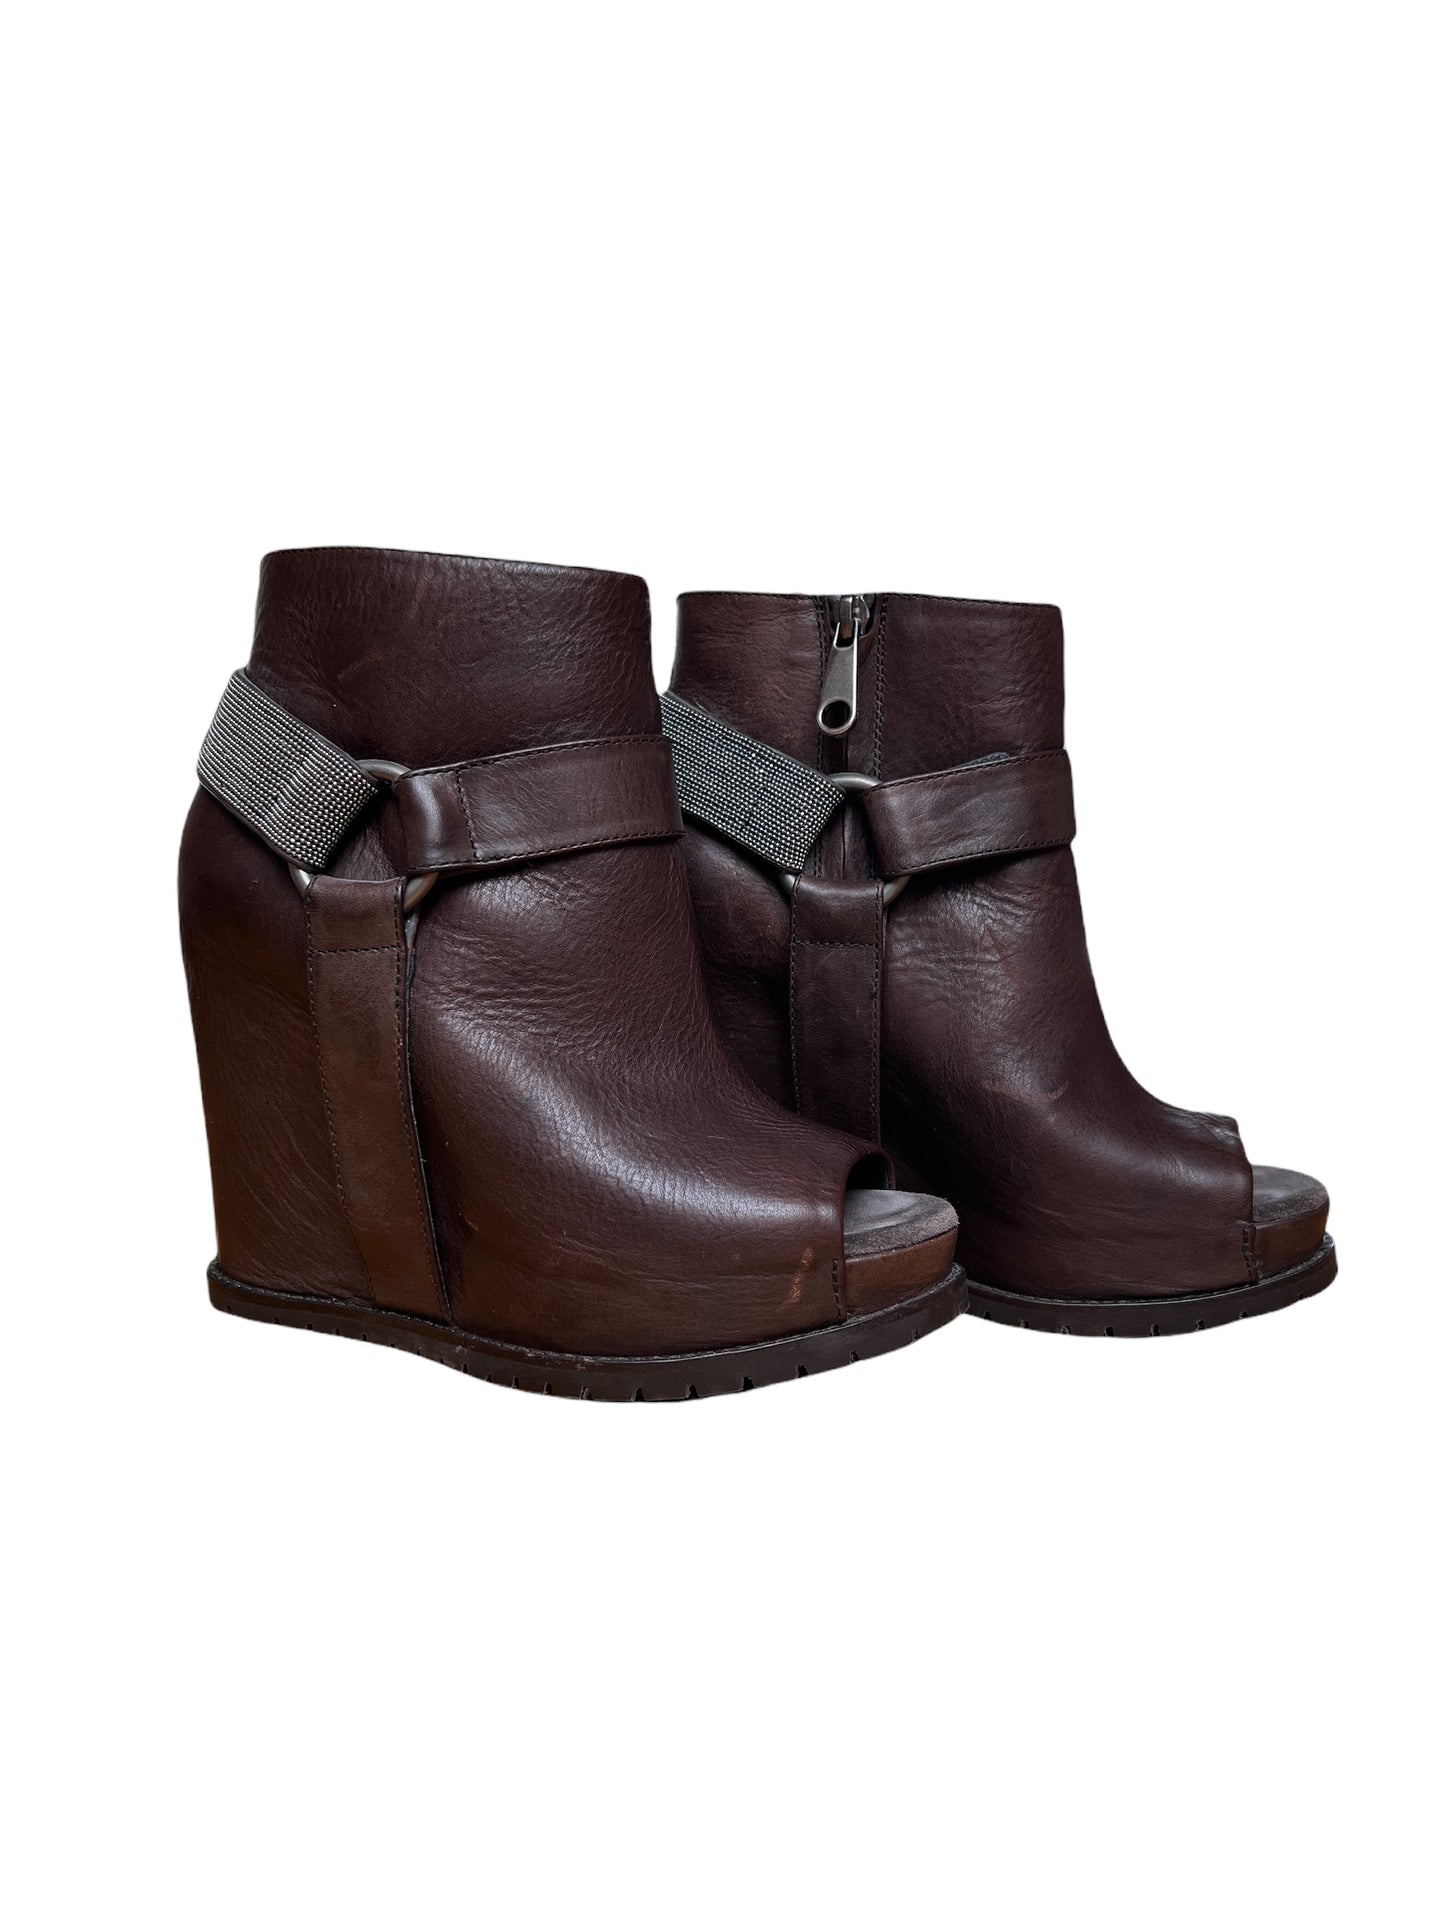 Brown Leather Low Boots - 6